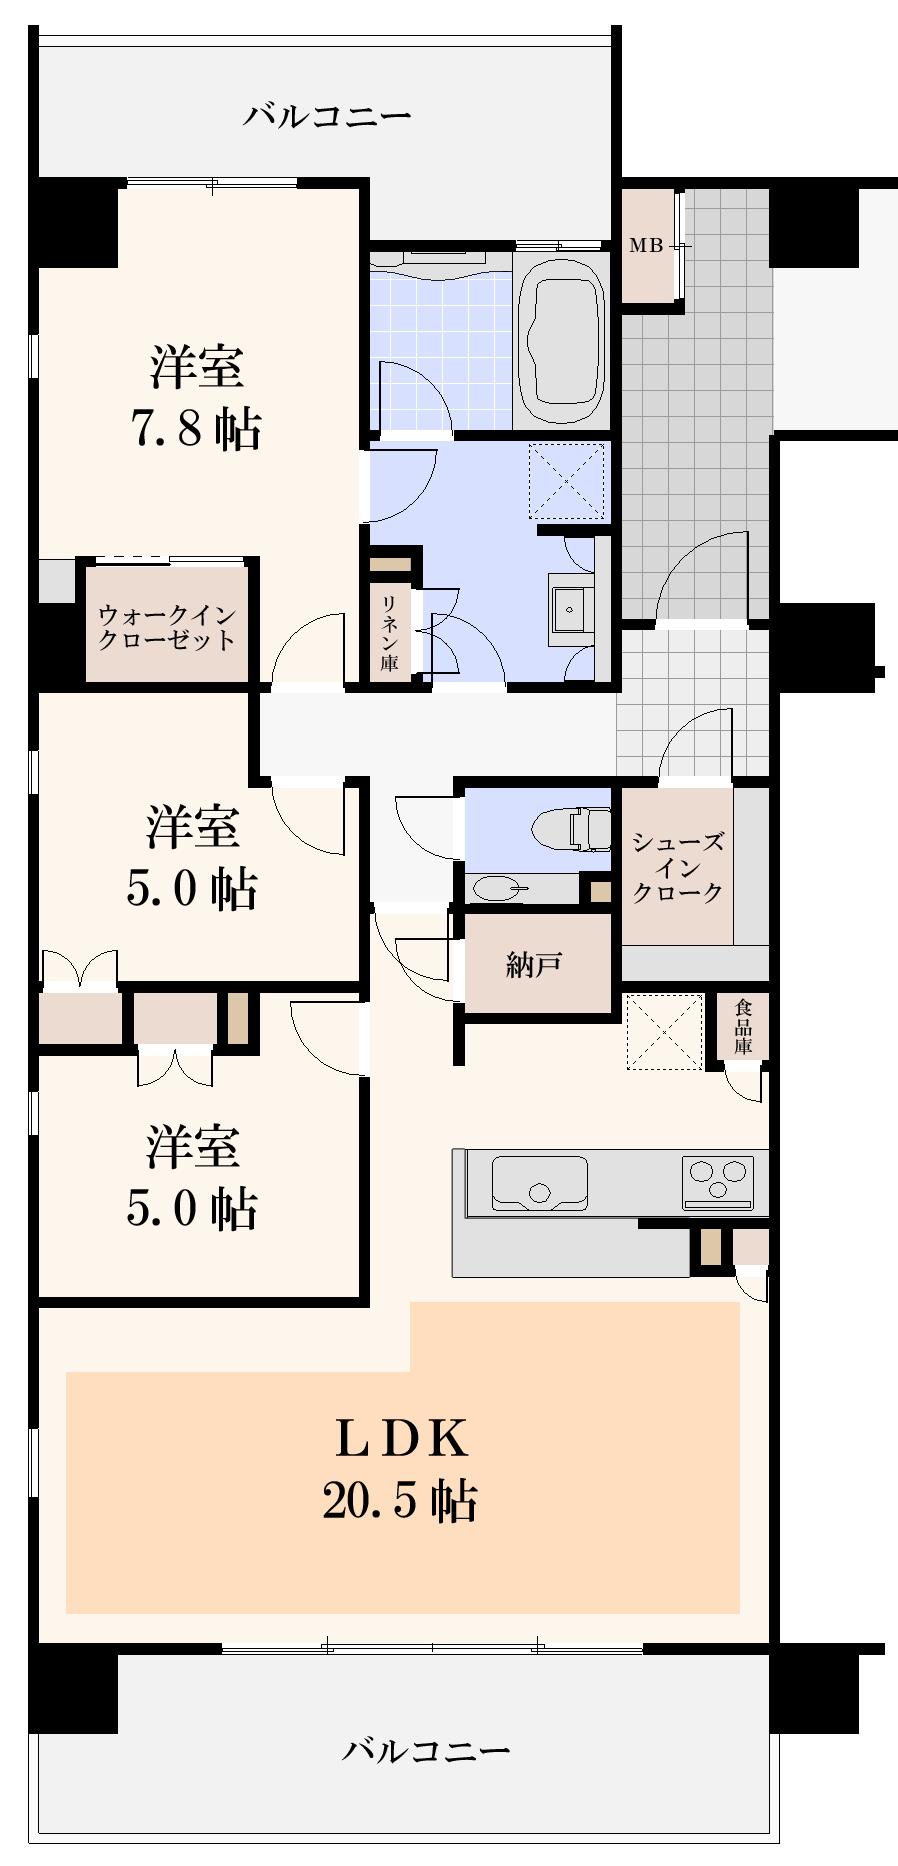 Floor plan. 3LDK, Price 74,800,000 yen, Occupied area 90.32 sq m , We become a good floor plan of the balcony area 21.64 sq m usability.